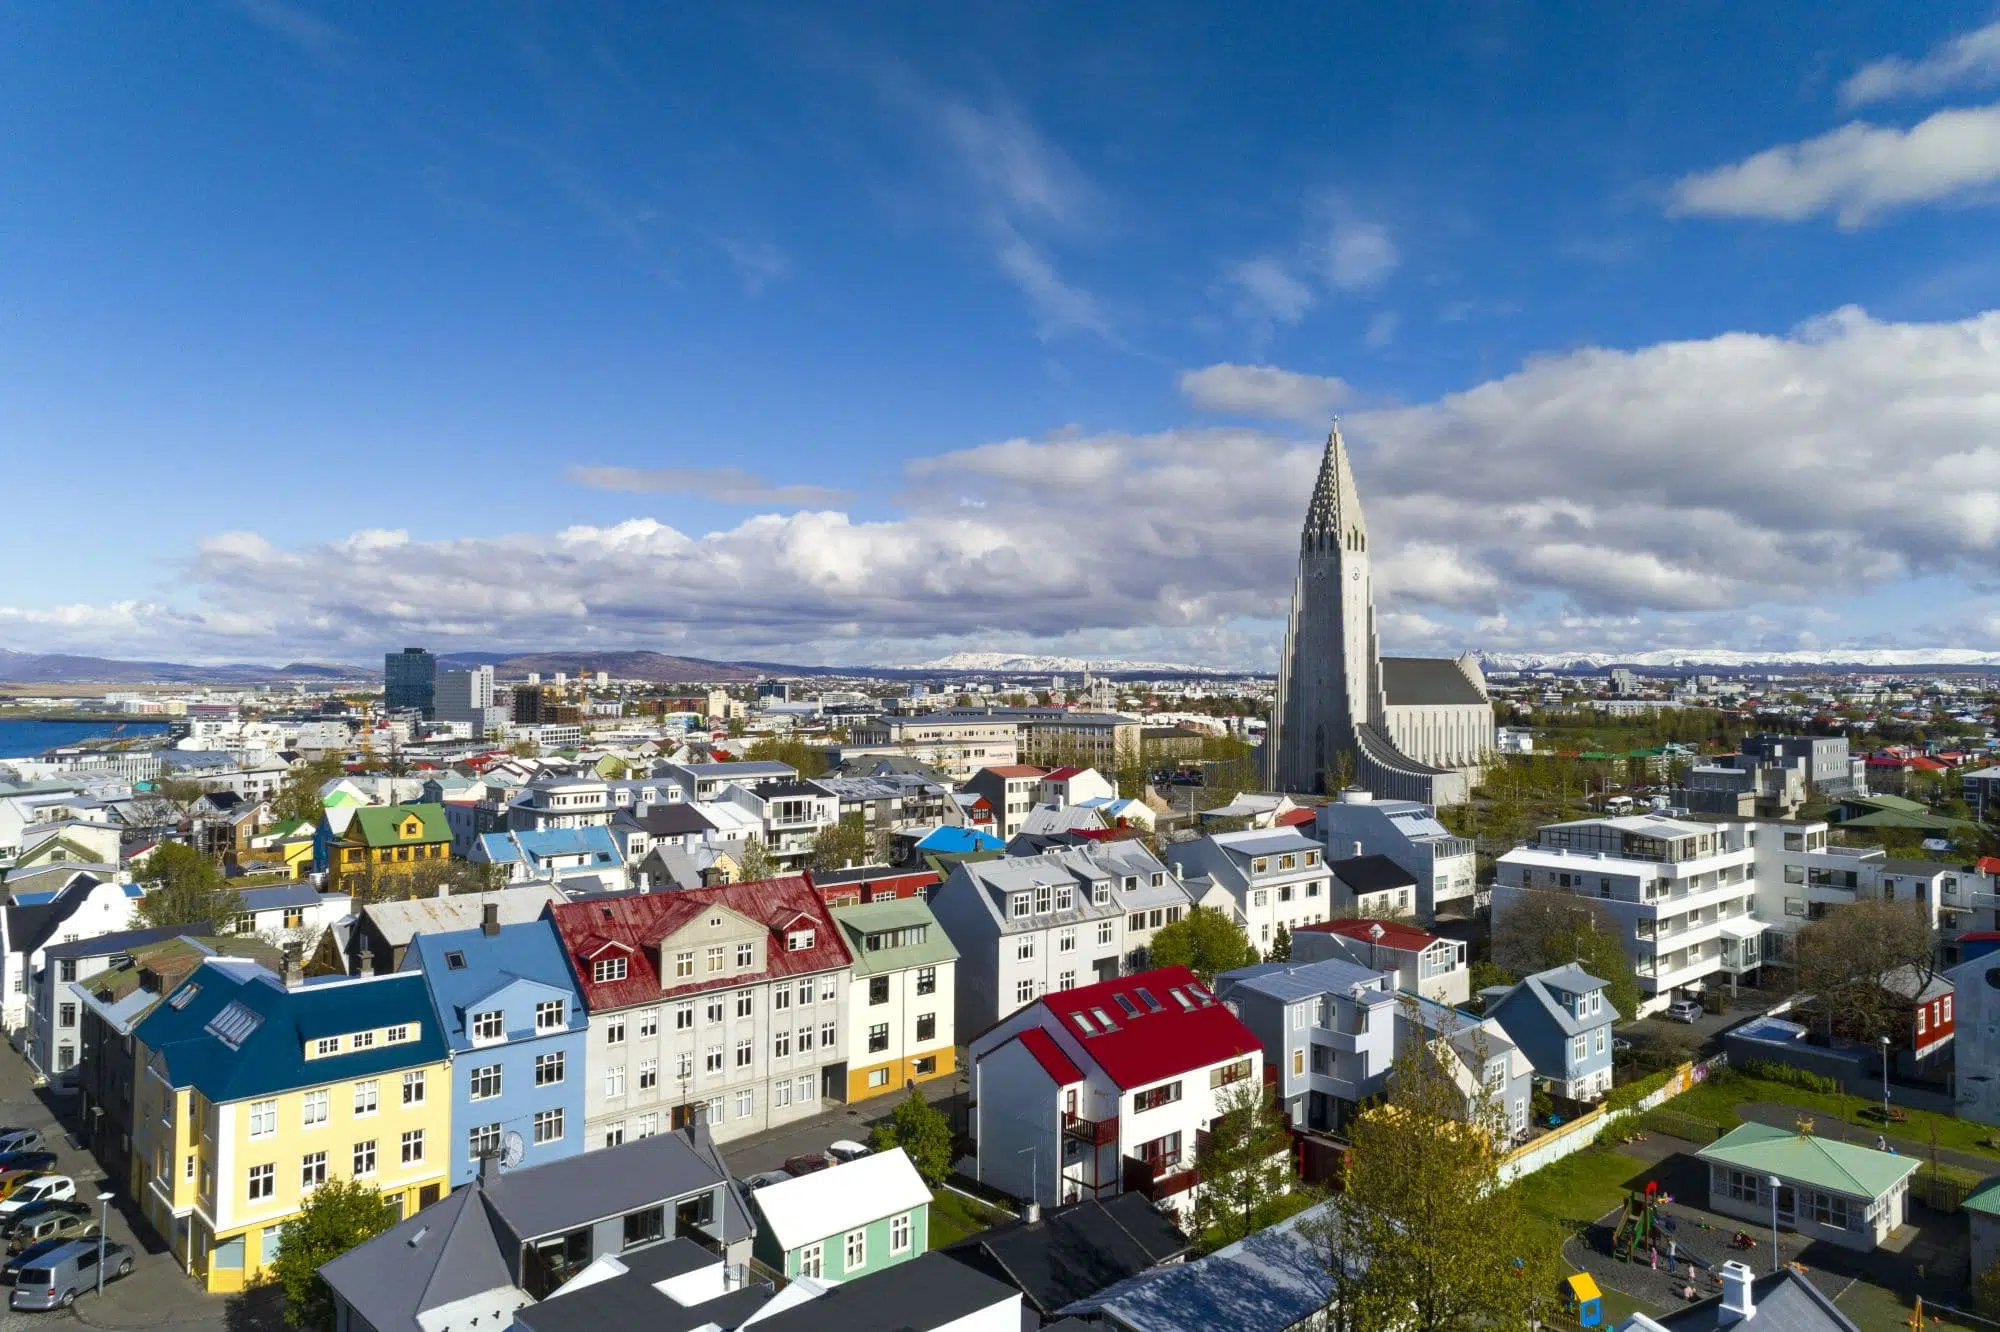 Will the situation on the Reykjanes peninsula affect the capital area?